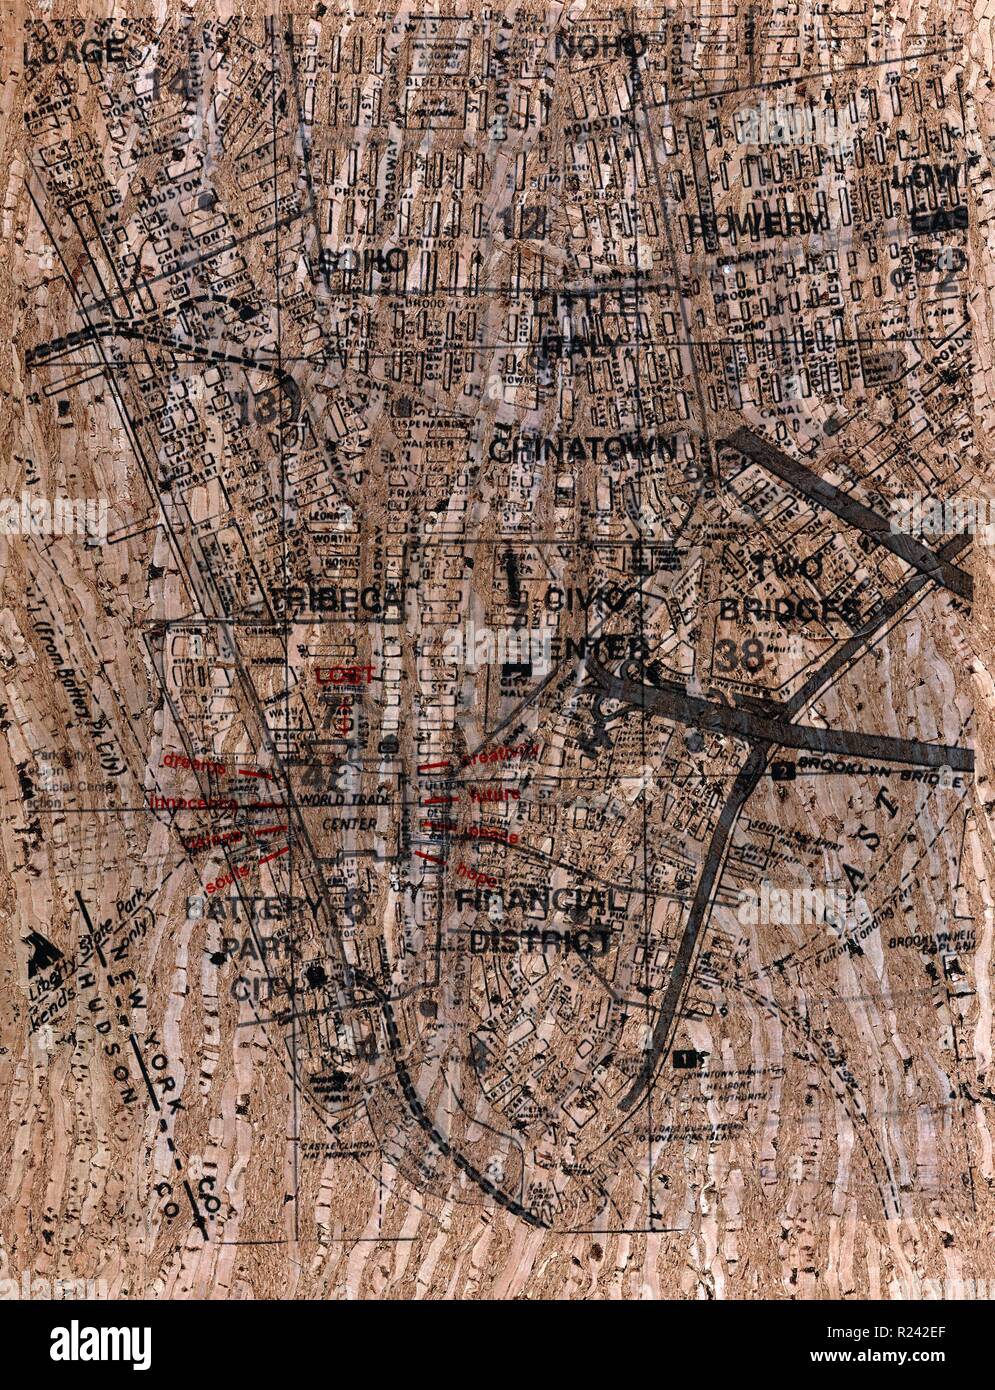 Street map showing the Ground Zero area of Lower Manhattan after the 9/11 attacks. Created by Rene Levy (1940-). Dated 2001 Stock Photo